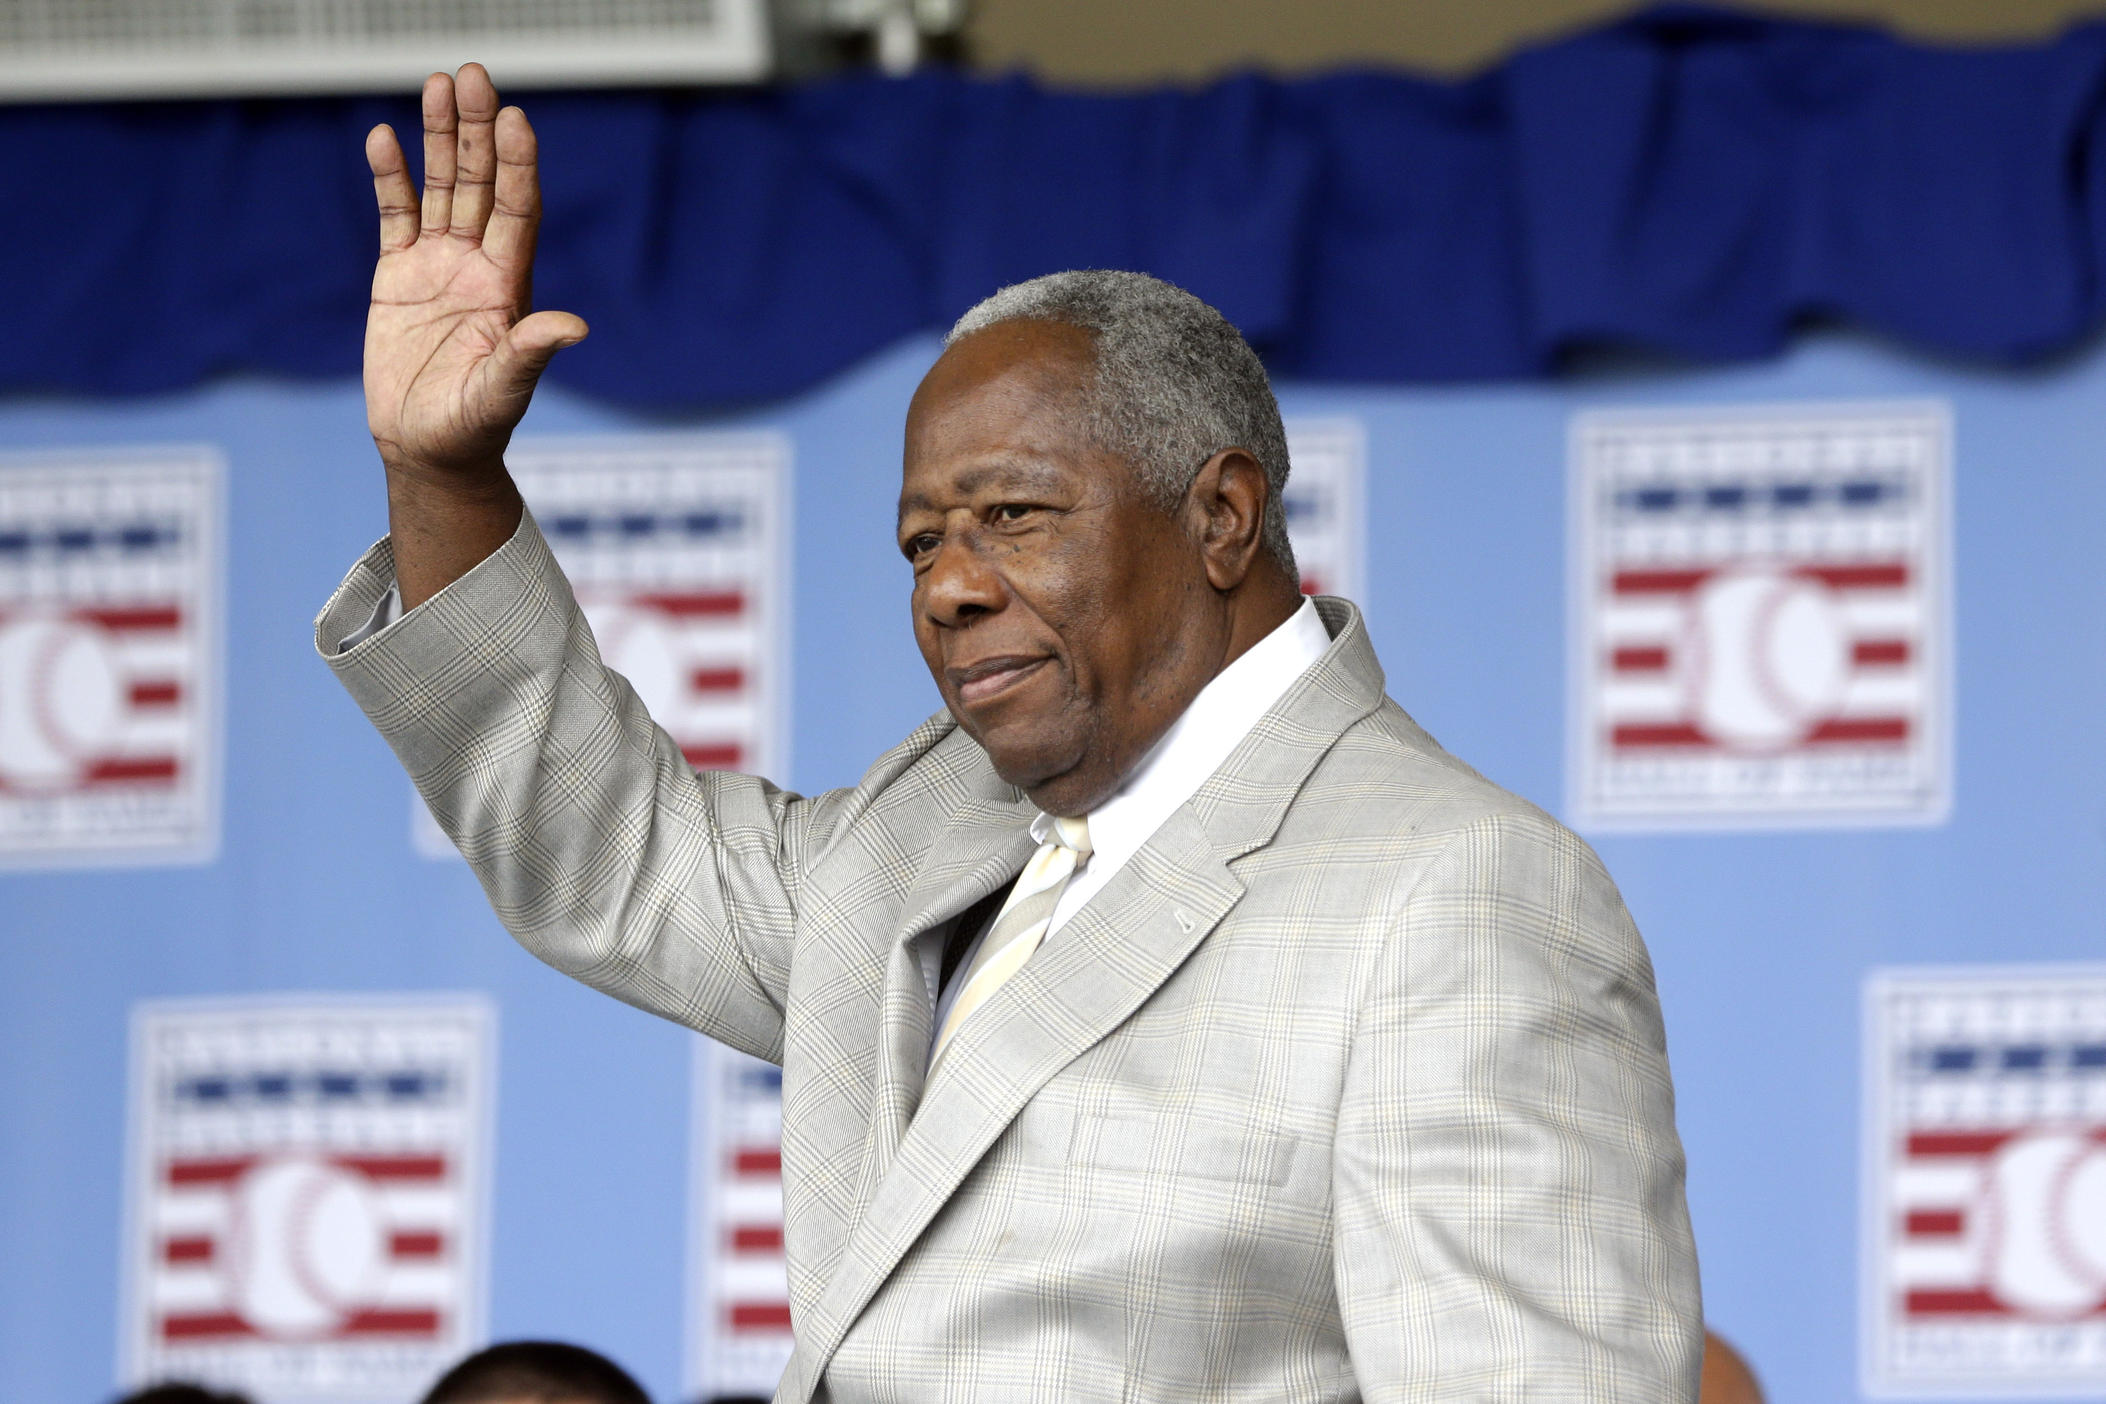 Late baseball Hall of Famer Hank Aaron is among several names being considered to replace a Ku Klux Klan member’s name on an Atlanta high school. A school board committee narrowed a list of recommended name changes for Forrest Hill Academy on Wednesday and included two tributes to the Milwaukee and Atlanta Braves right fielder, including Hank Aaron Center of Learning and Growth and Hank Aaron New Beginnings Academy. Aaron died last week at the age of 86. 